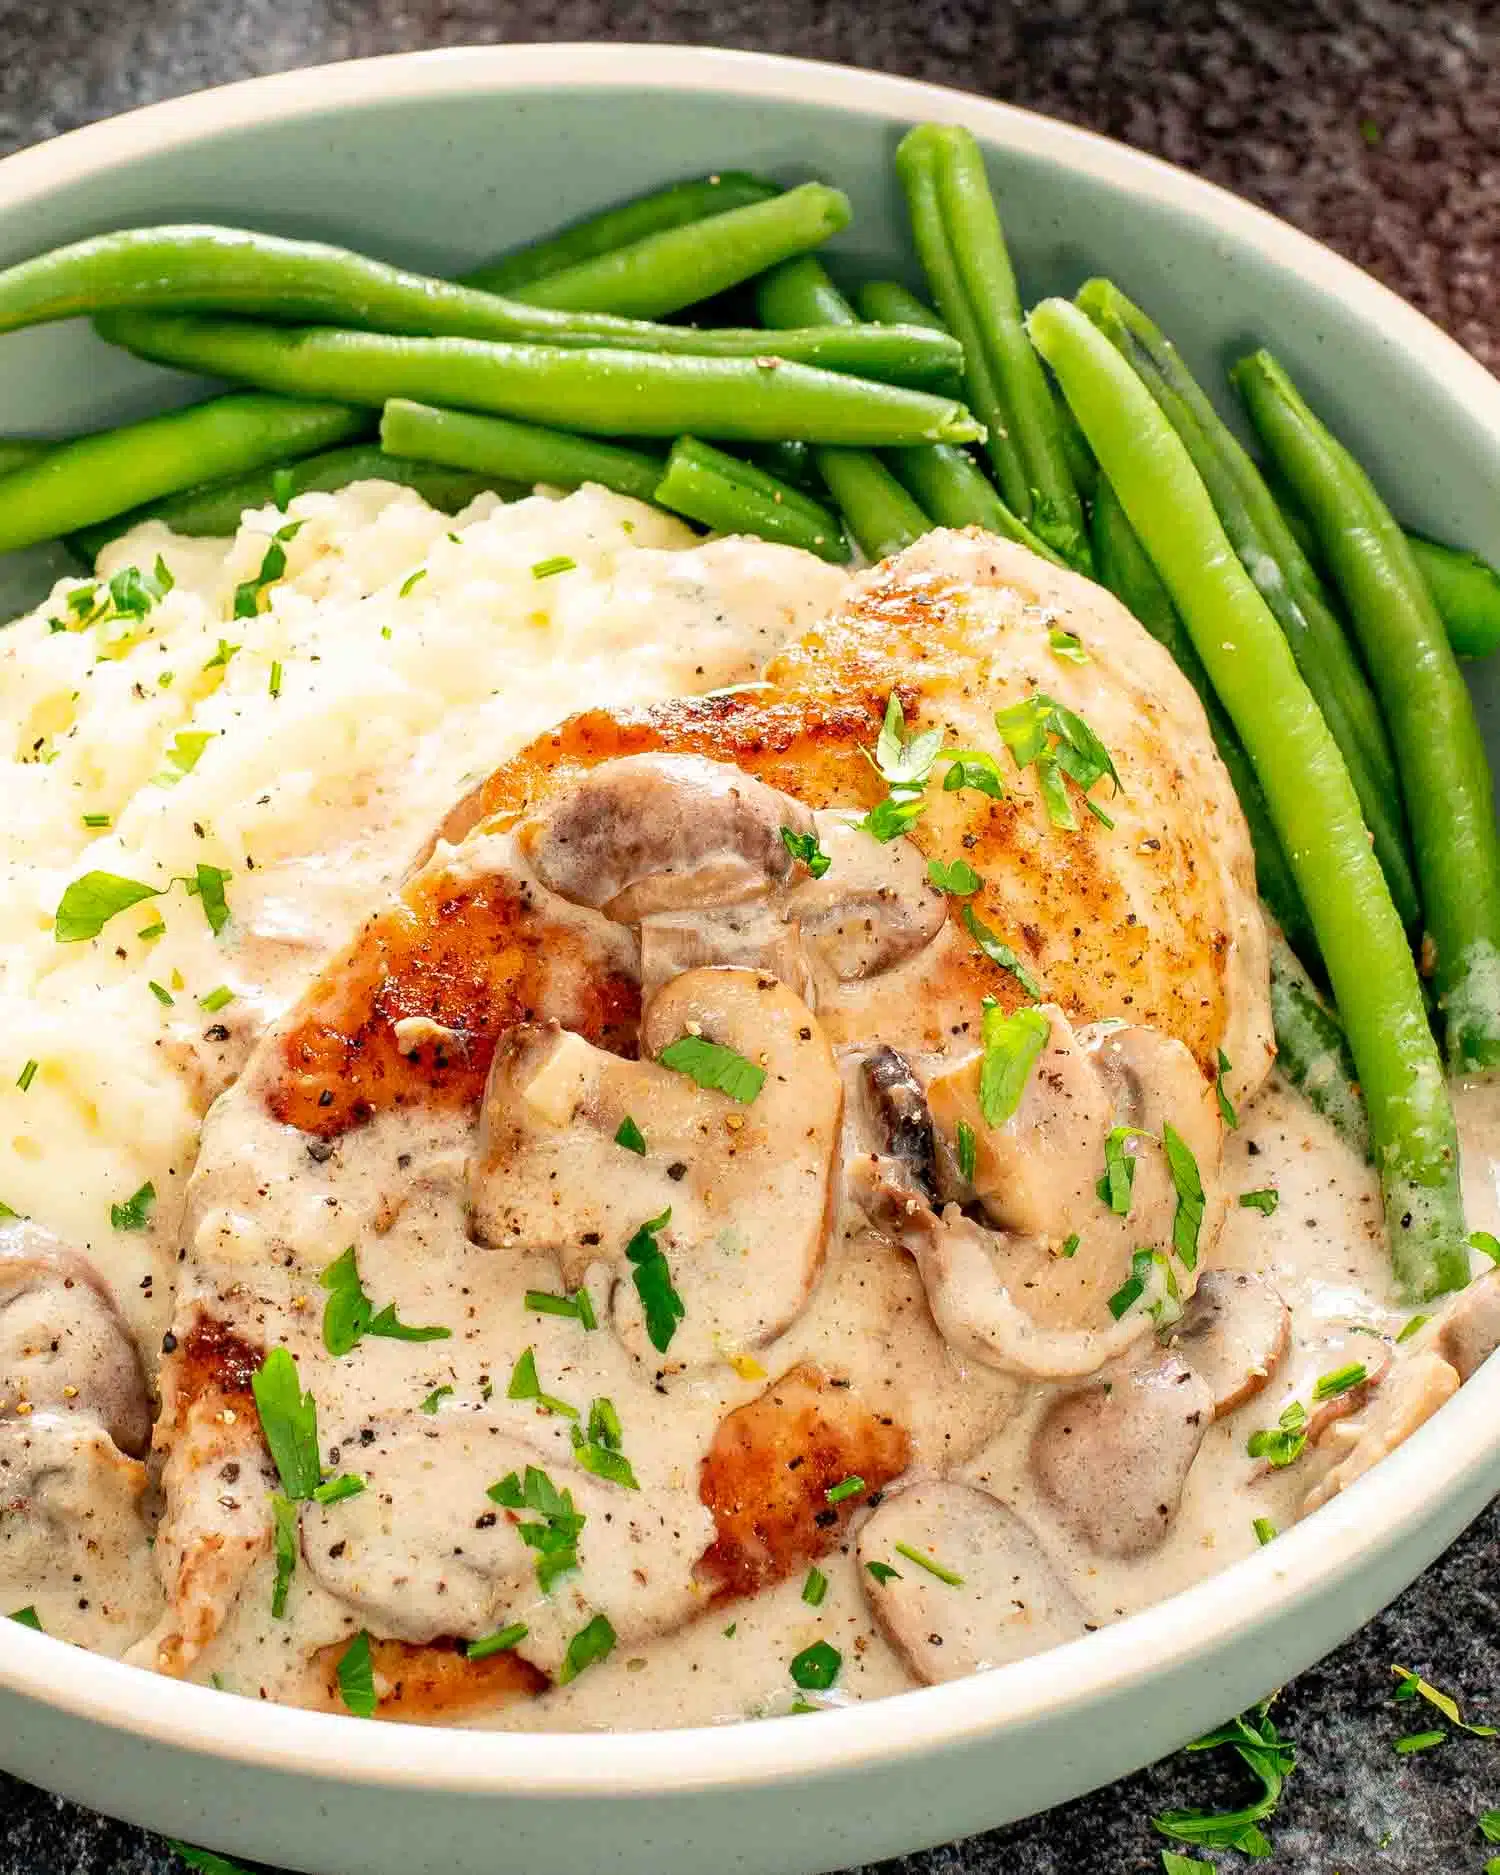 a piece of creamy garlic mushroom chicken in a blue bowl with mashed potatoes.